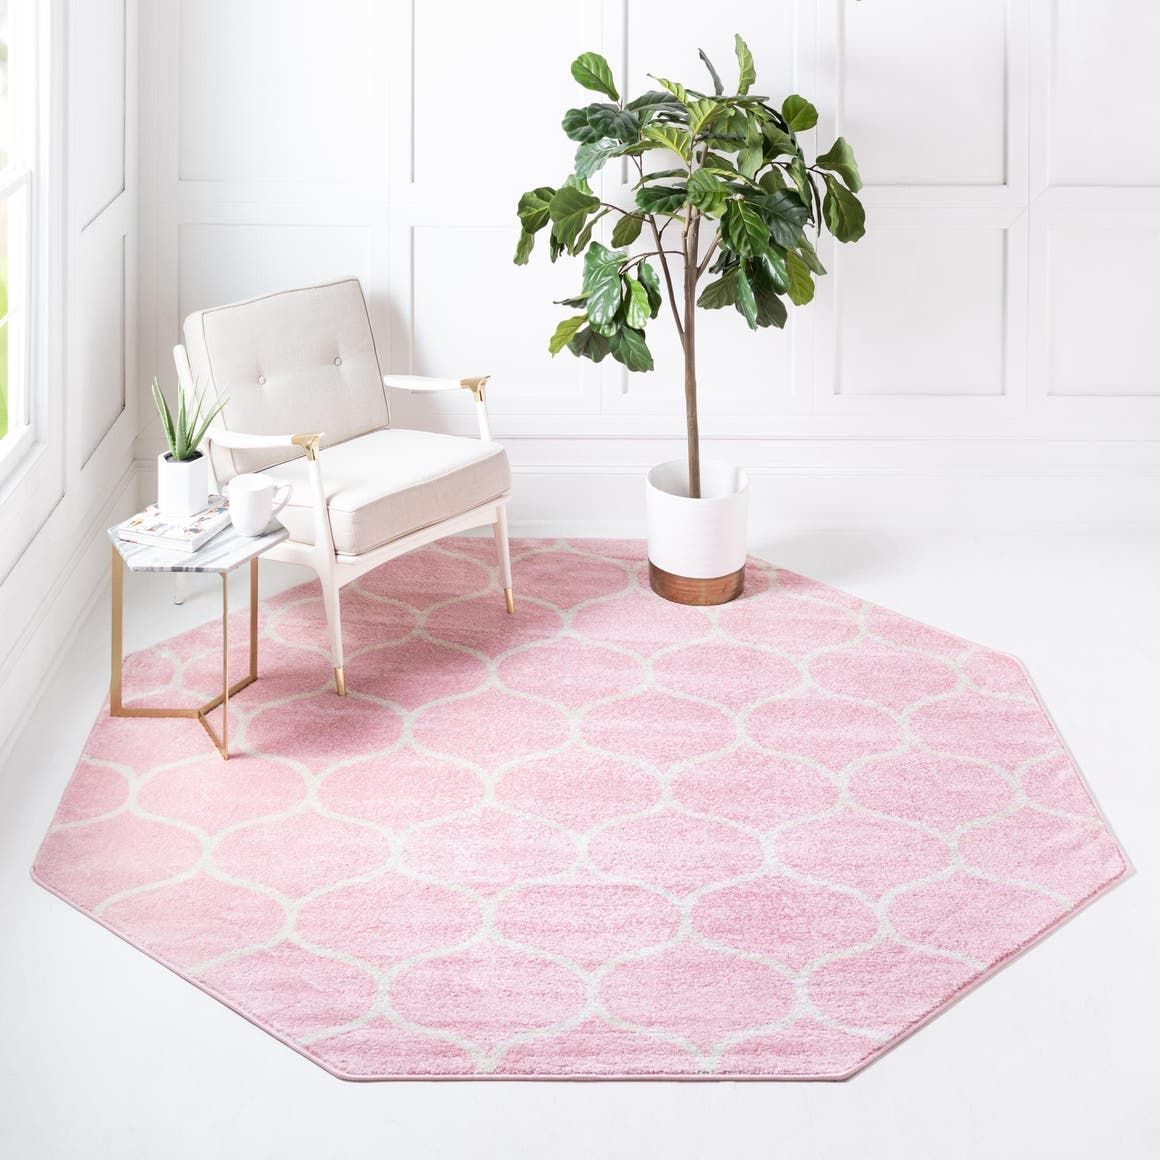 Light Pink 5' X 5' Lattice Frieze Octagon Rug | Octagon Rugs, Modern Area  Rugs, Pink Area Rug Within Pink Lattice Frieze Rugs (View 4 of 15)